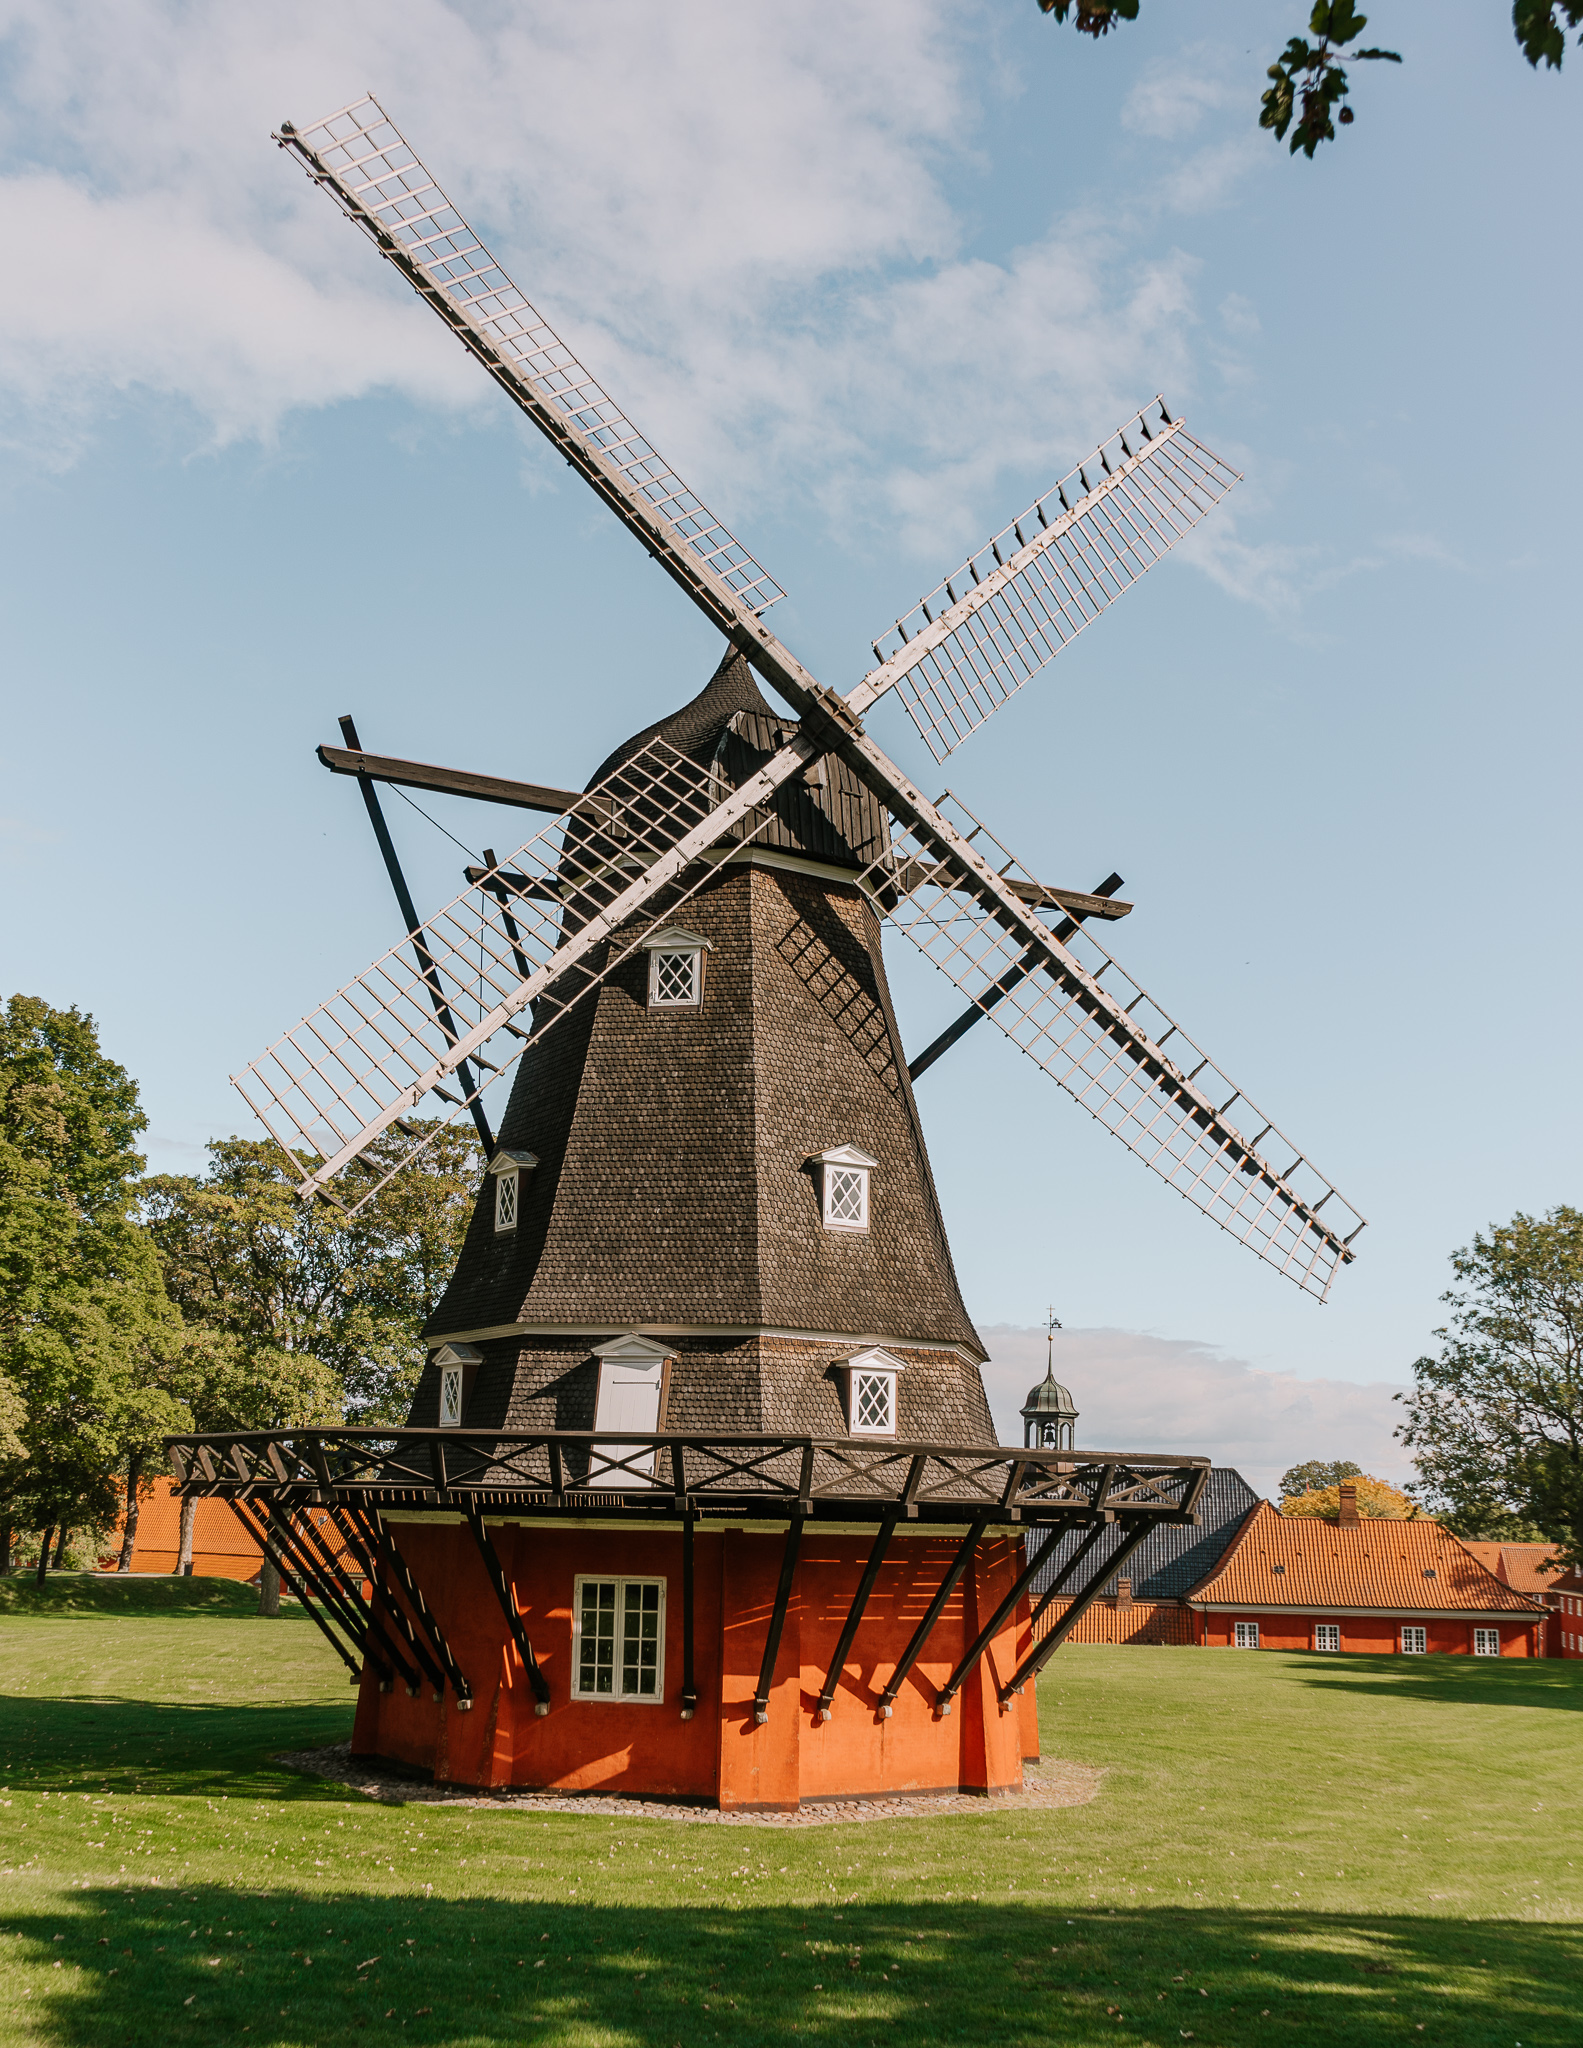 A black and red historic looking windmill in a grassy park on a sunny day in Kastellet, Copenhagen.